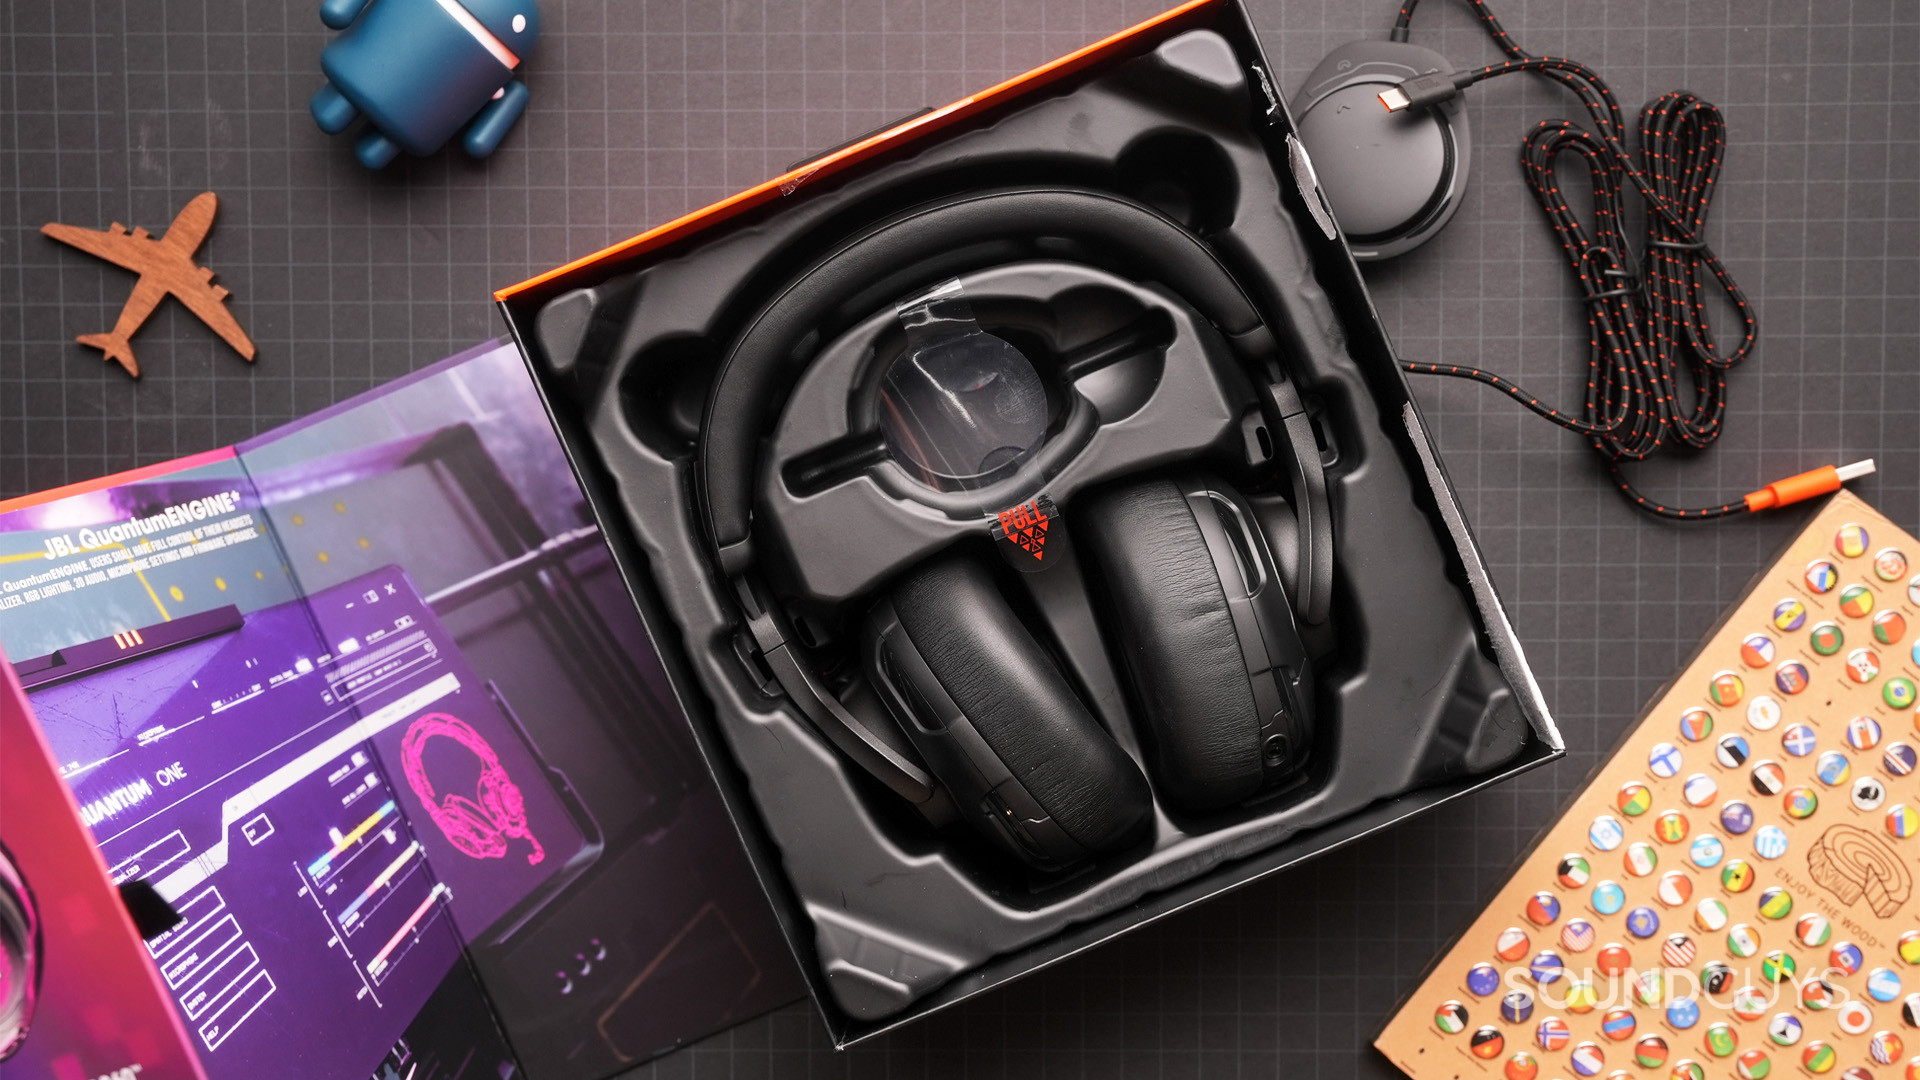 The JBL Quantum One fit snuggly inside of its box